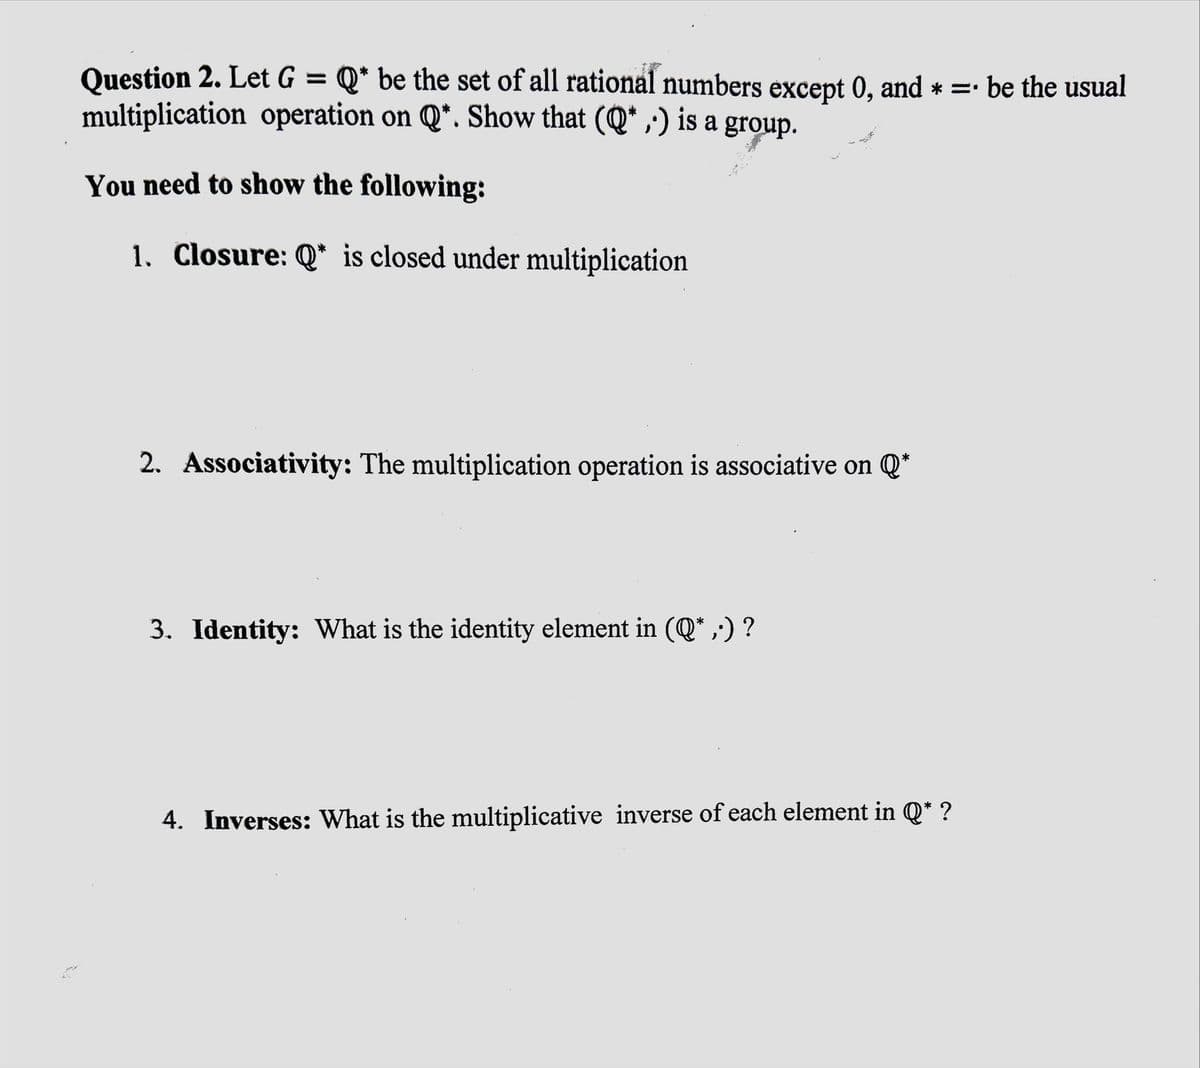 24
Question 2. Let G = Q* be the set of all rational numbers except 0, and * = be the usual
multiplication operation on Q*. Show that (Q*,) is a group.
You need to show the following:
1. Closure: Q* is closed under multiplication
2. Associativity: The multiplication operation is associative on Q*
3. Identity: What is the identity element in (Q*,•) ?
4. Inverses: What is the multiplicative inverse of each element in Q* ?